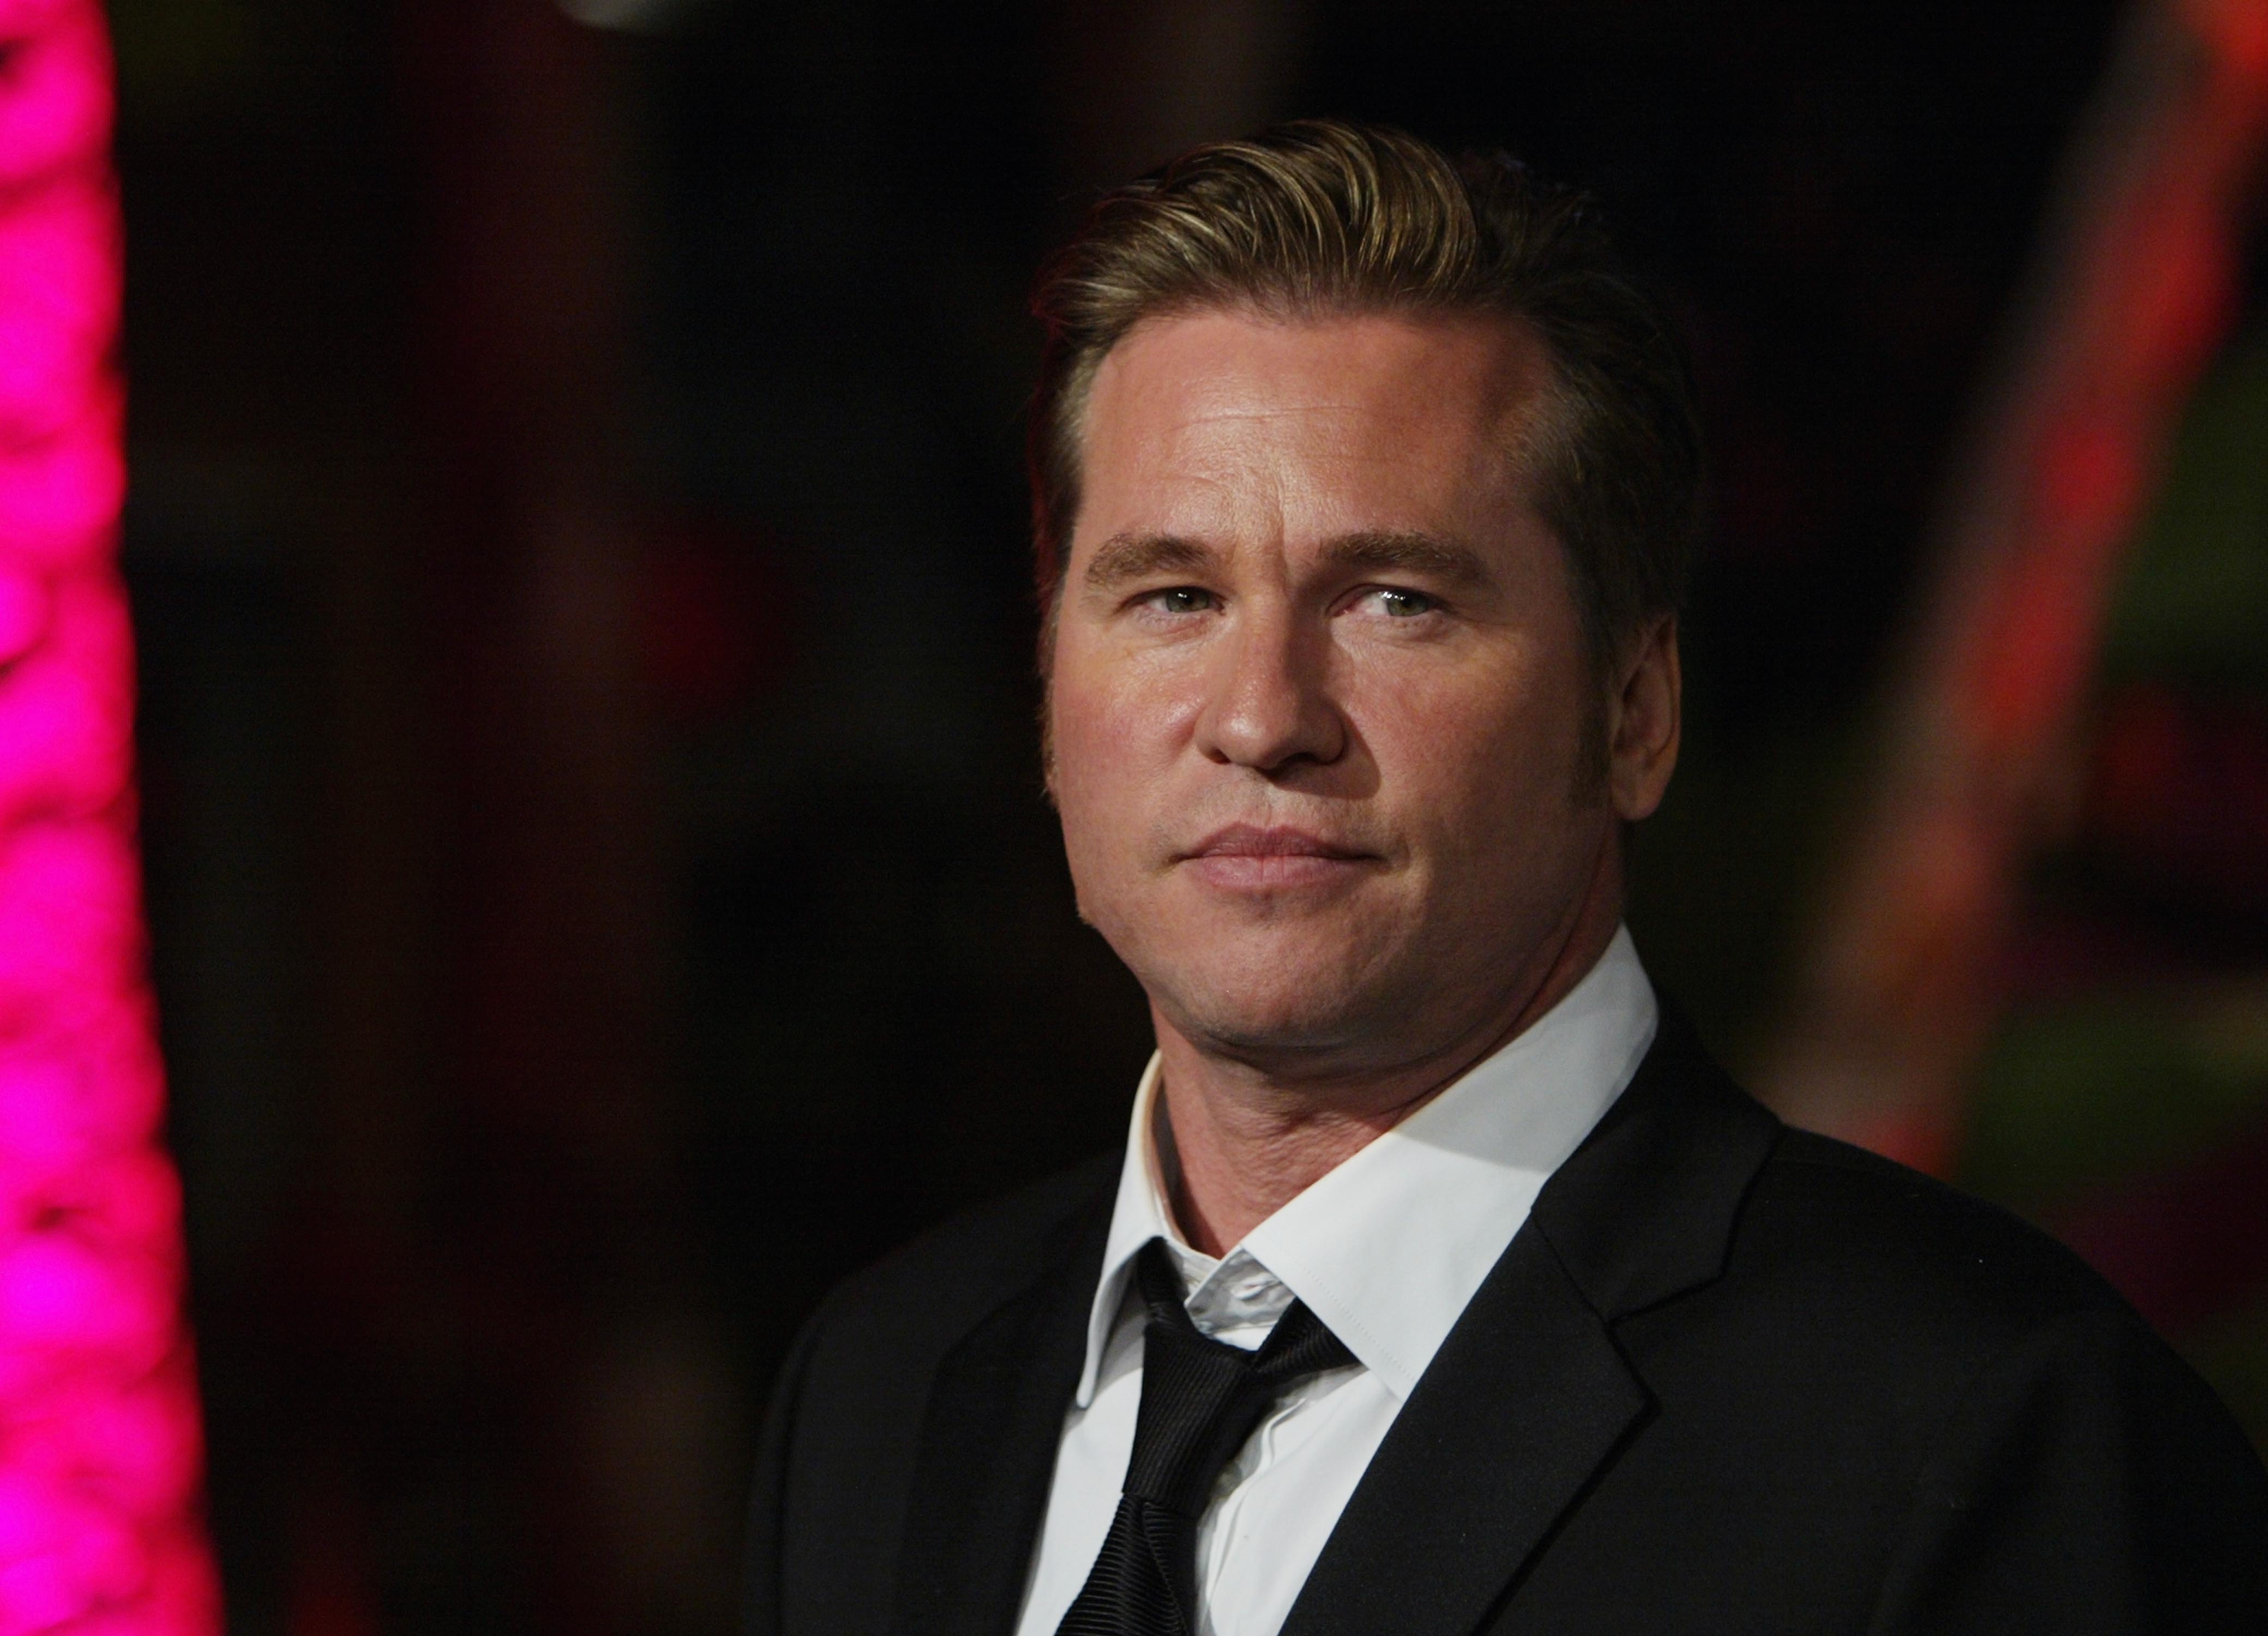 Veteran actor Val Kilmer during the 2004 Vanity Fair Oscar Party in Hollywood. | Photo: Getty Images